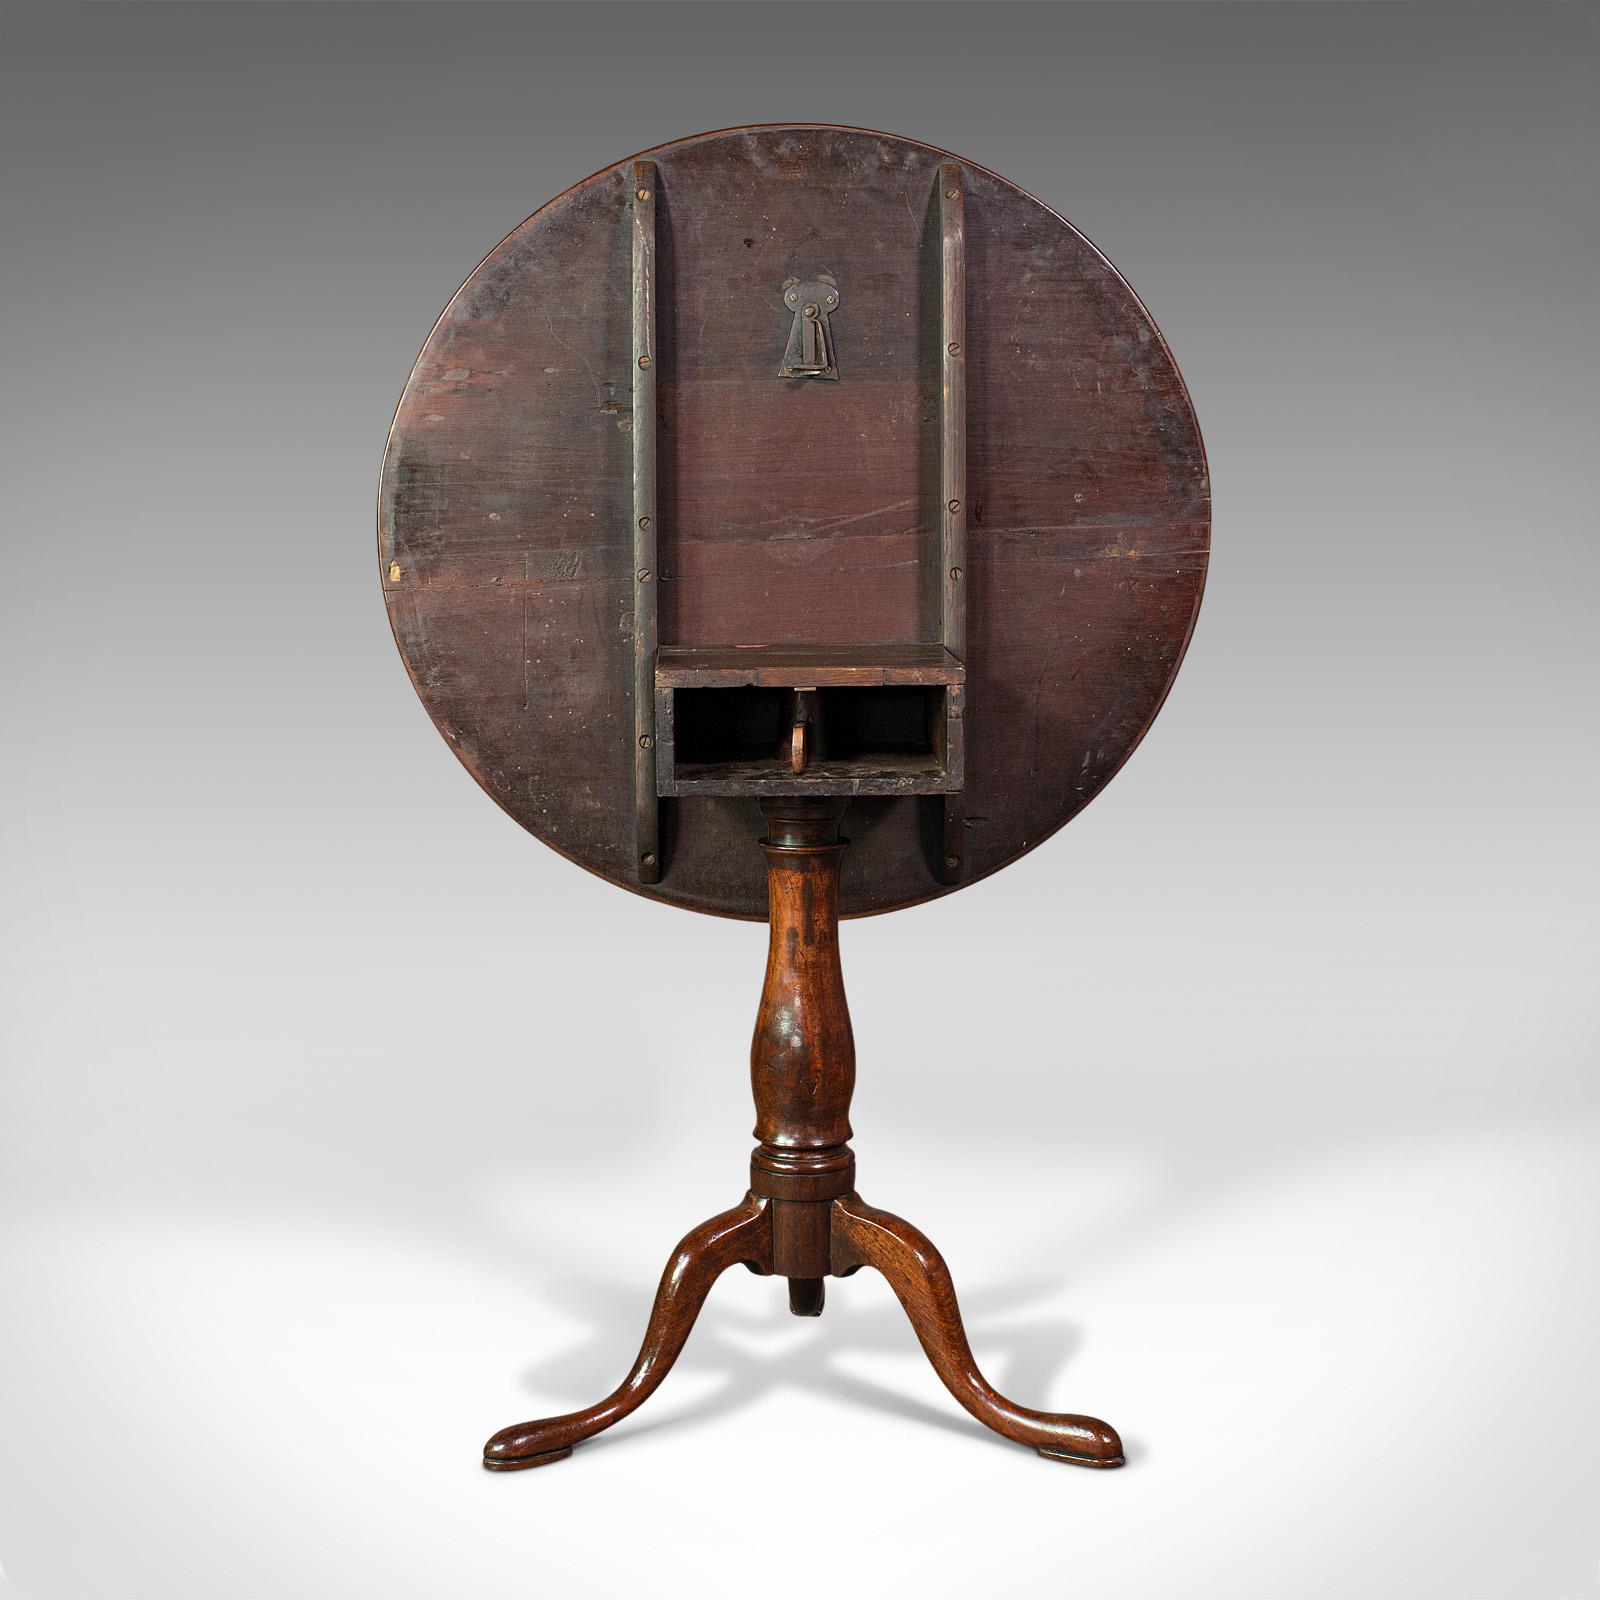 Antique Tilt Top Table, English, Mahogany, Occasional, Wine, Georgian, C.1780 For Sale 2